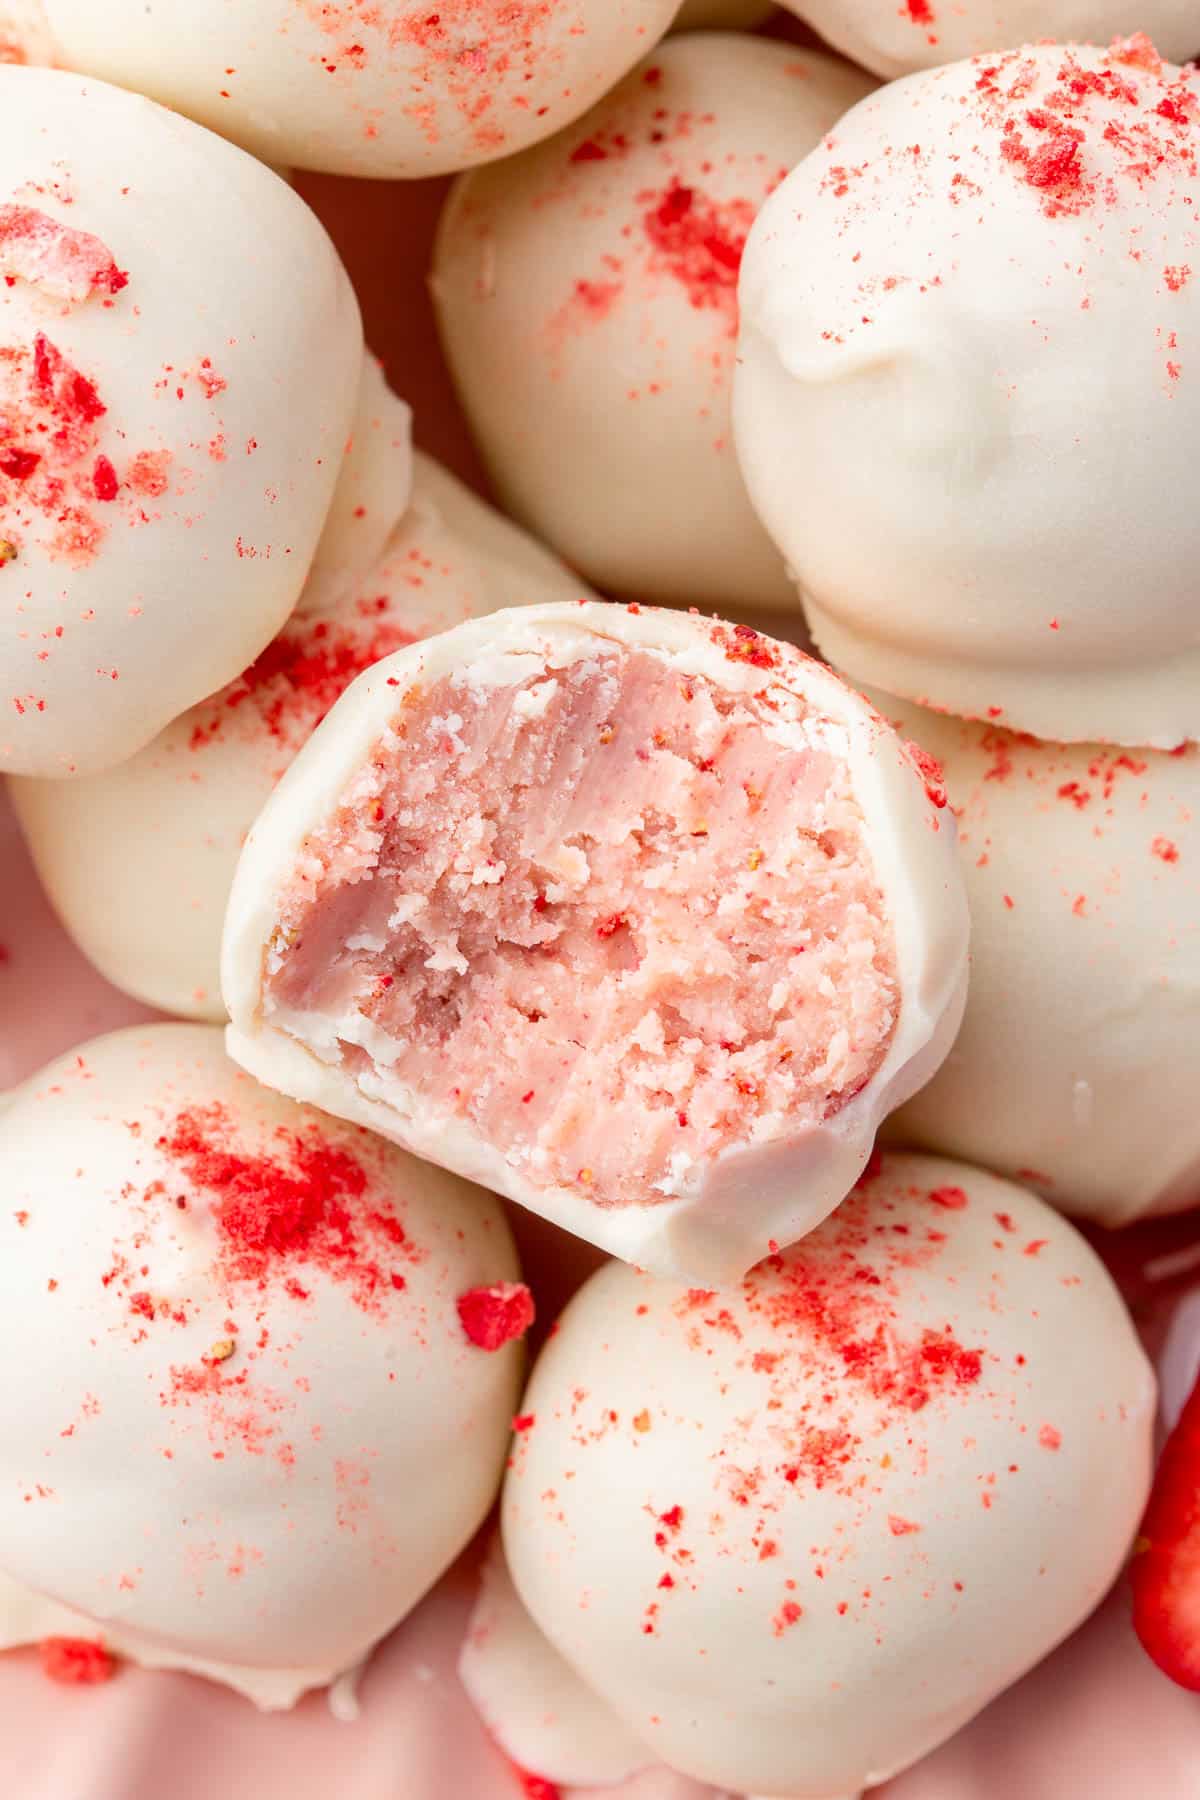 A close up shot of a strawberry truffle with a bite taken out of it sitting on top of a plate of more white chocolate strawberry truffles.